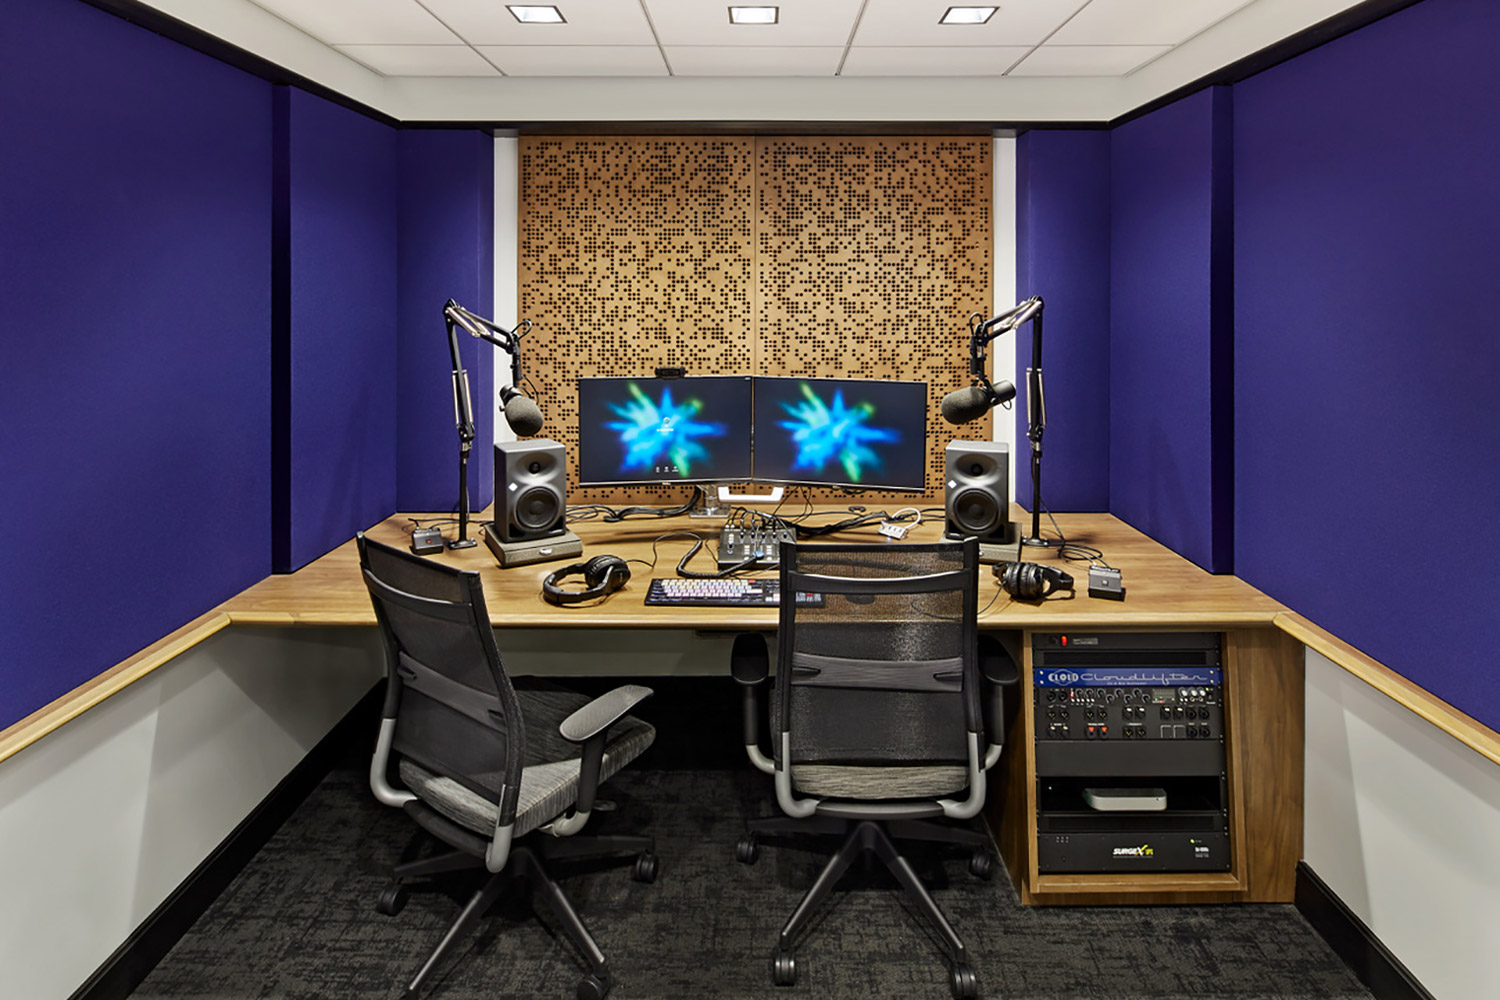 Stitcher is among the earliest, the most creative and most successful podcast creator companies. Their team made a move to build out larger production facilities in both its NY and LA offices and they chose WSDG to design their new podcast studios facilities. Edit A.